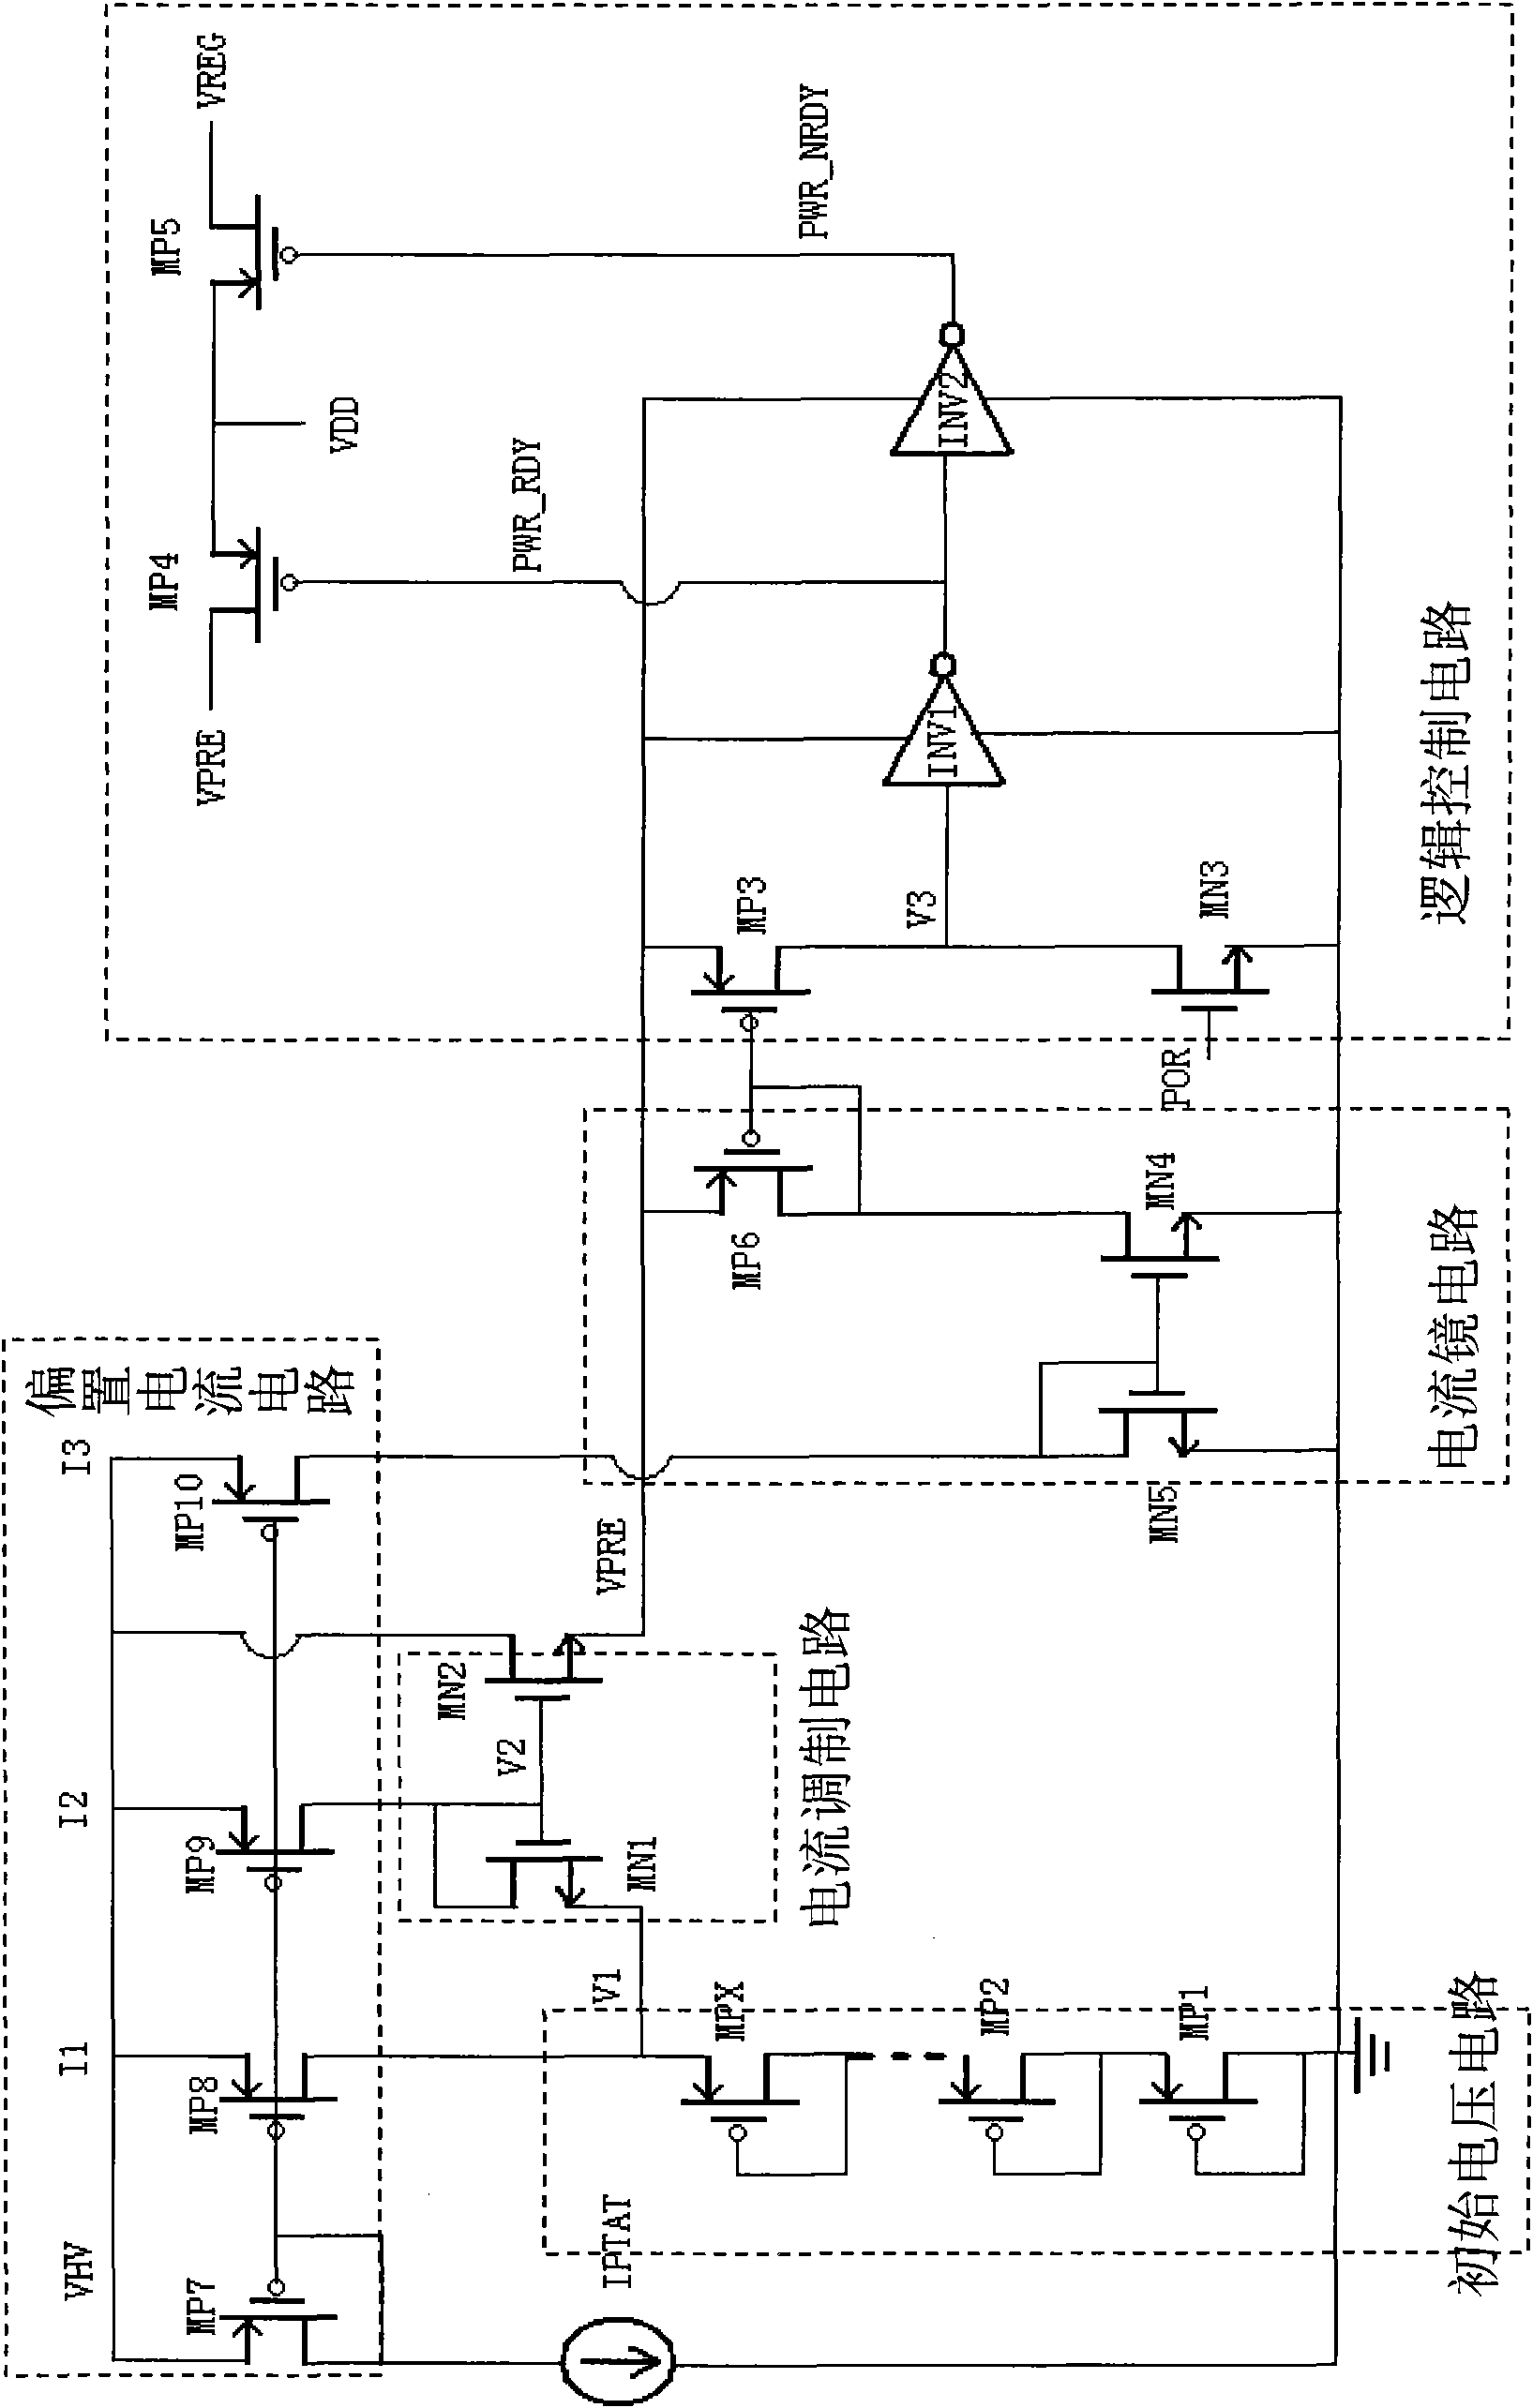 Quick starting power supply for power chip